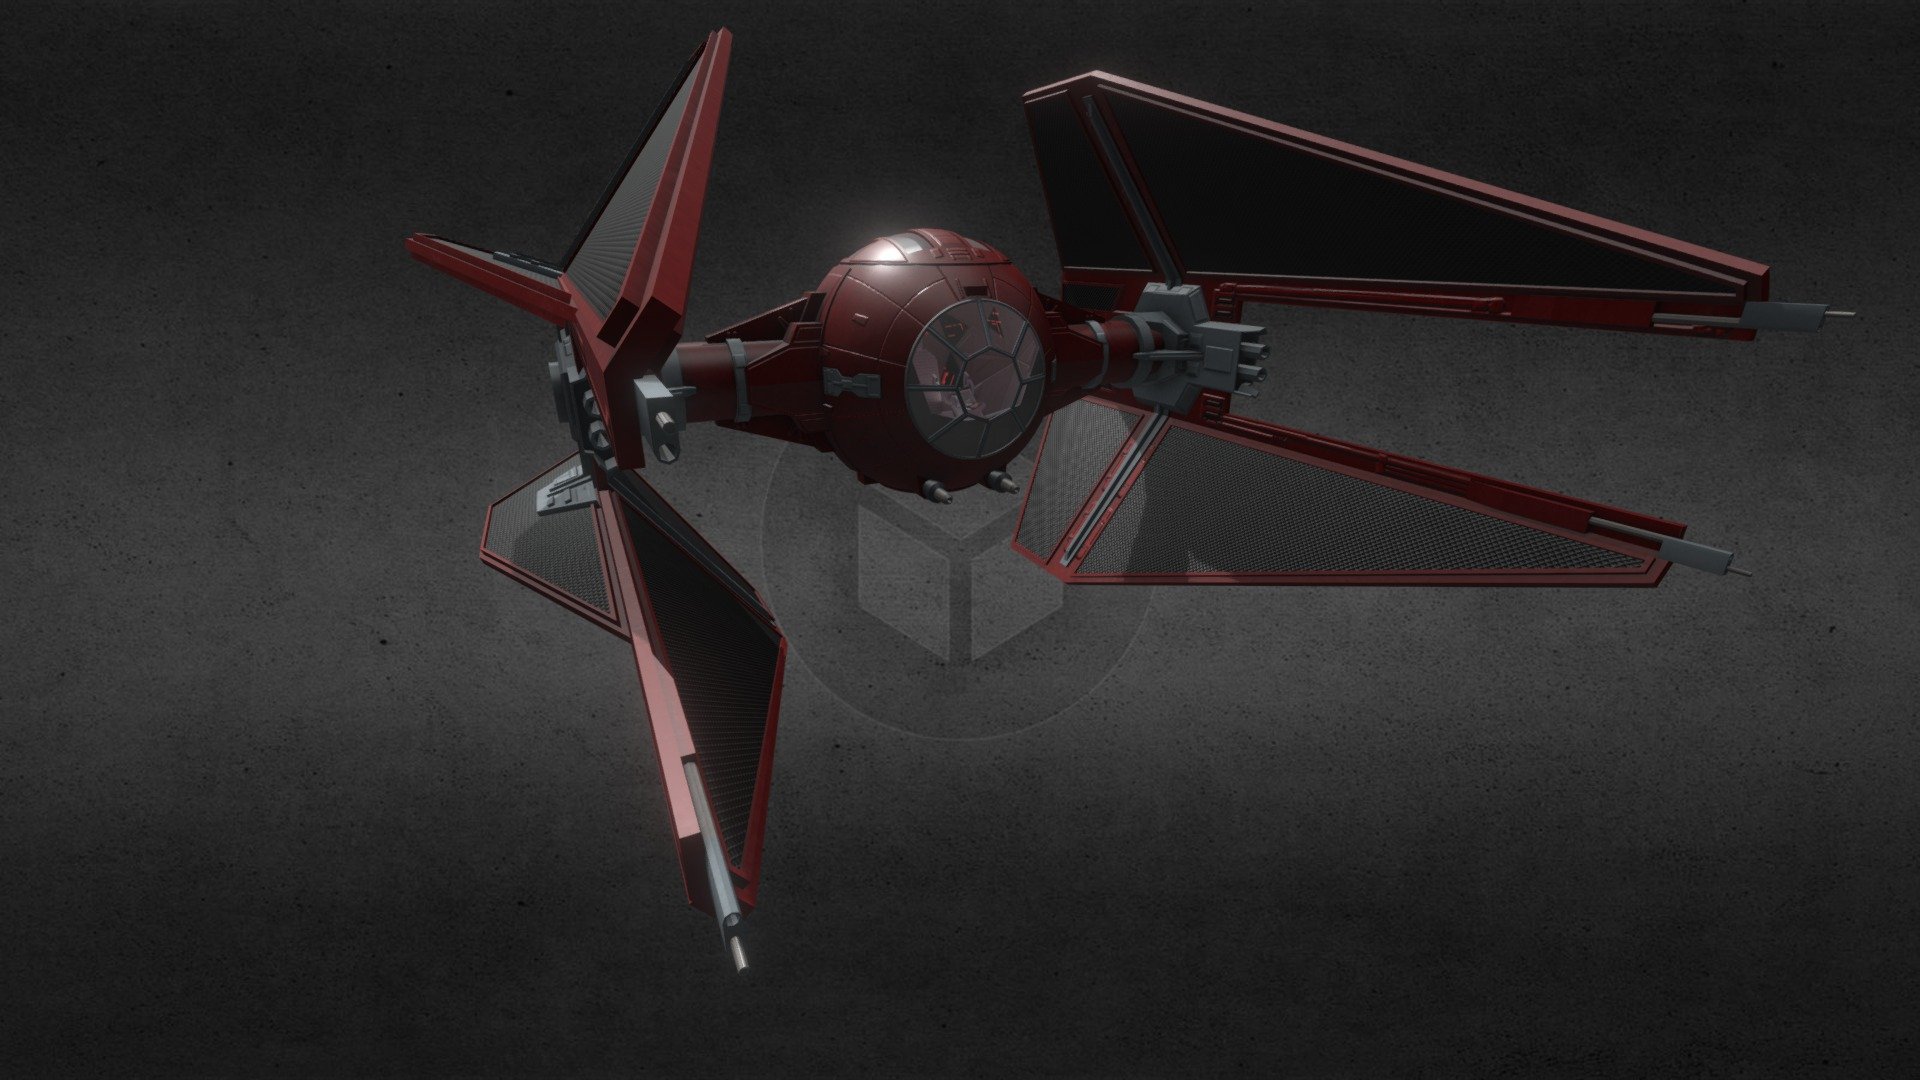 The Emperor's Royal Guard TIE/IN starfighter was a specially modified version of the TIE/IN interceptor. These TIE Interceptors were flown only by Emperor Palpatine's Royal Guard 3d model